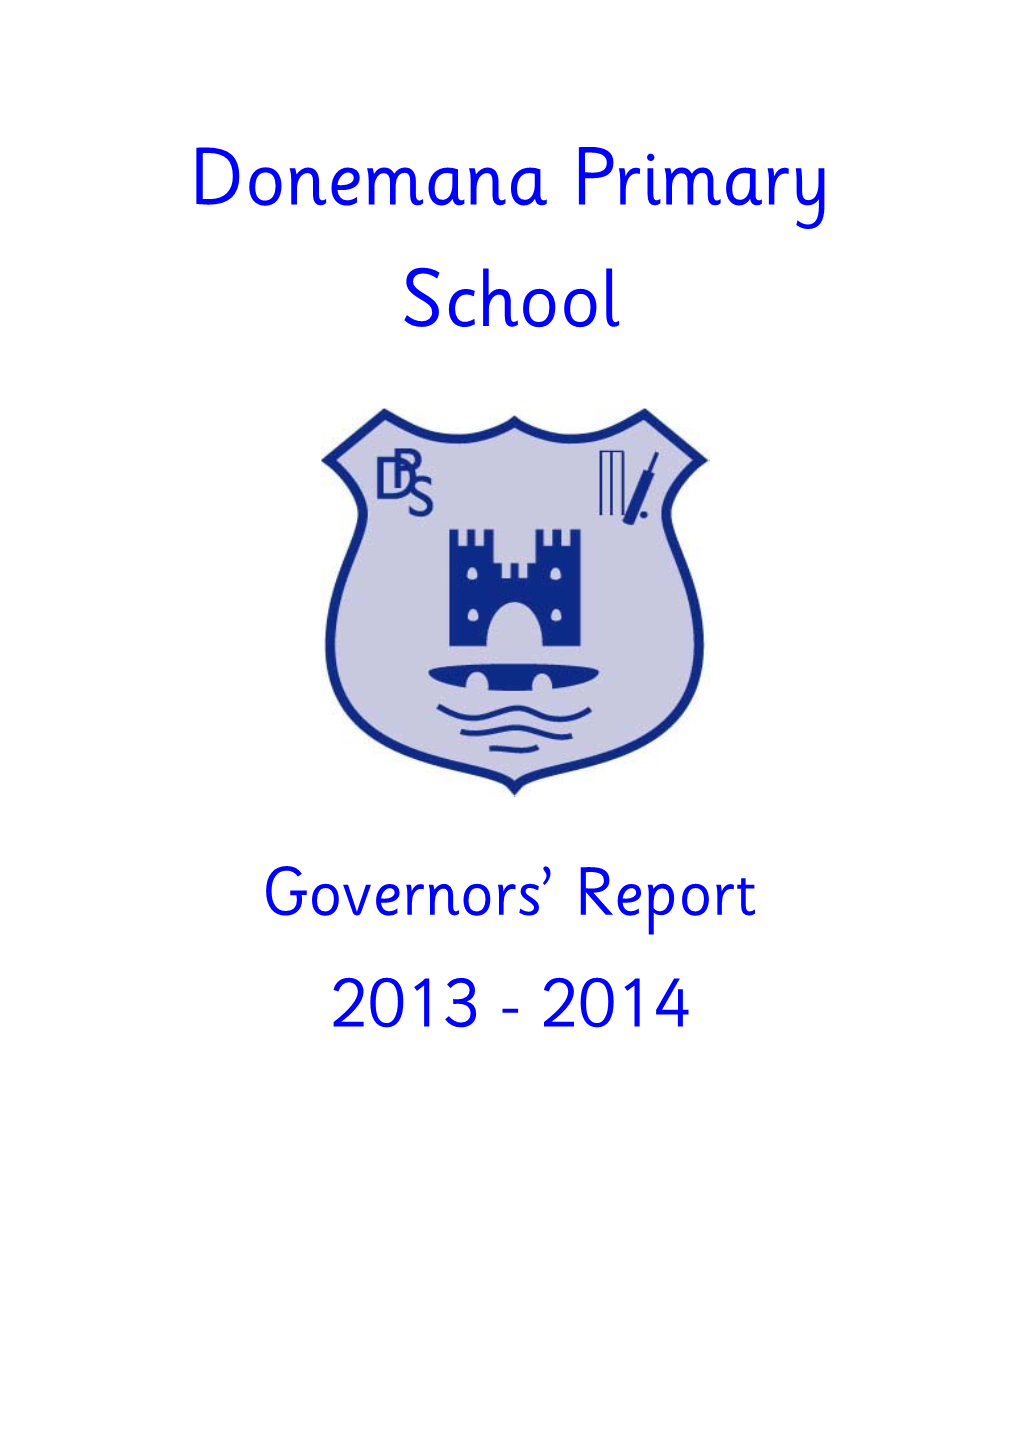 Governors' Report 2013